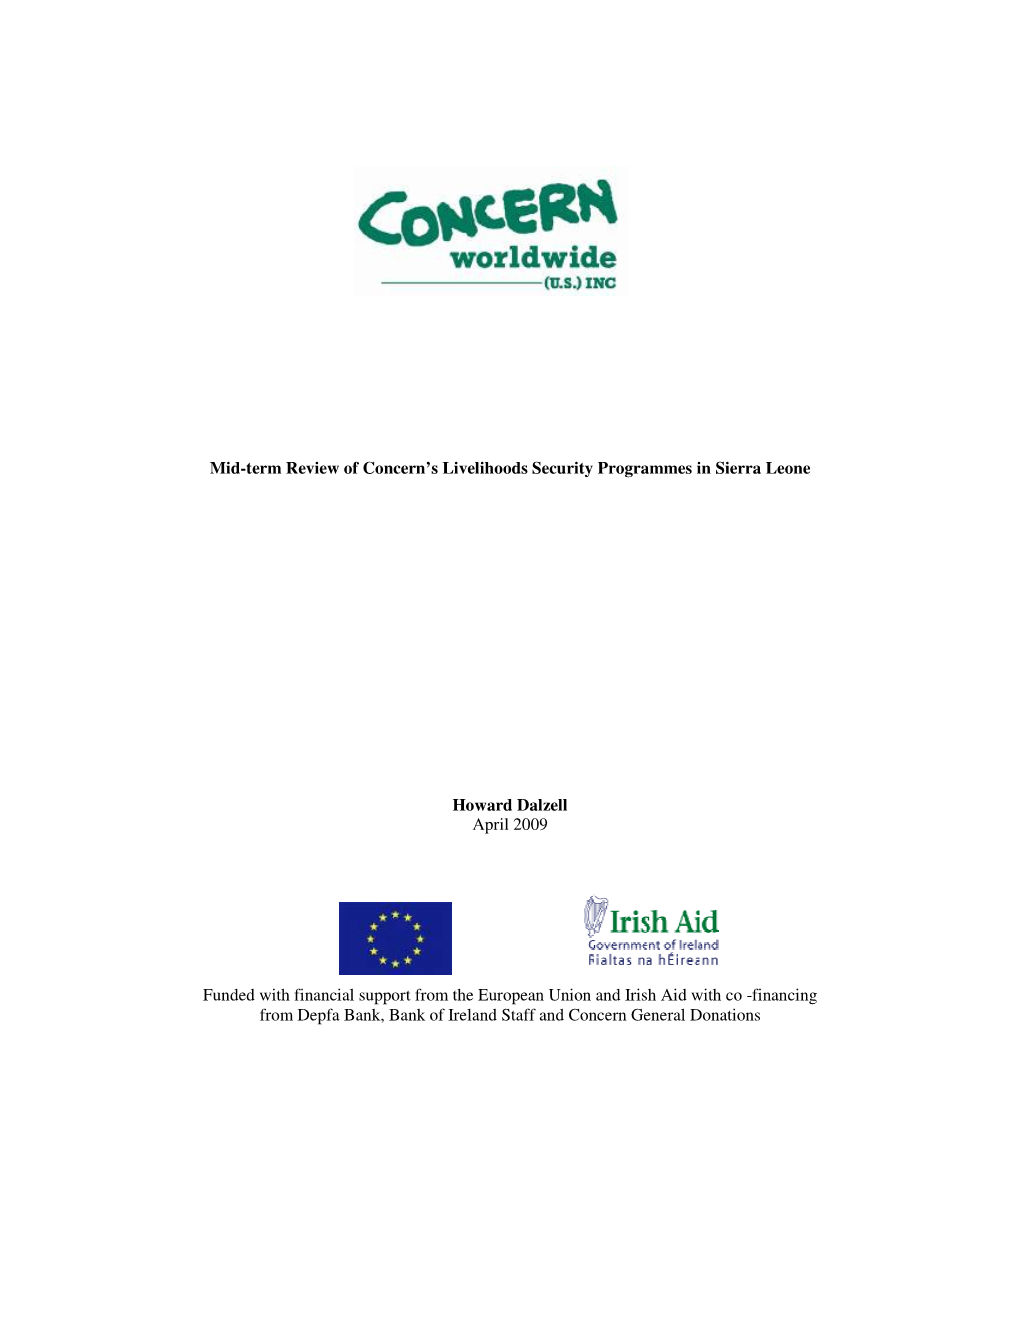 Mid-Term Review of Concern's Livelihoods Security Programmes